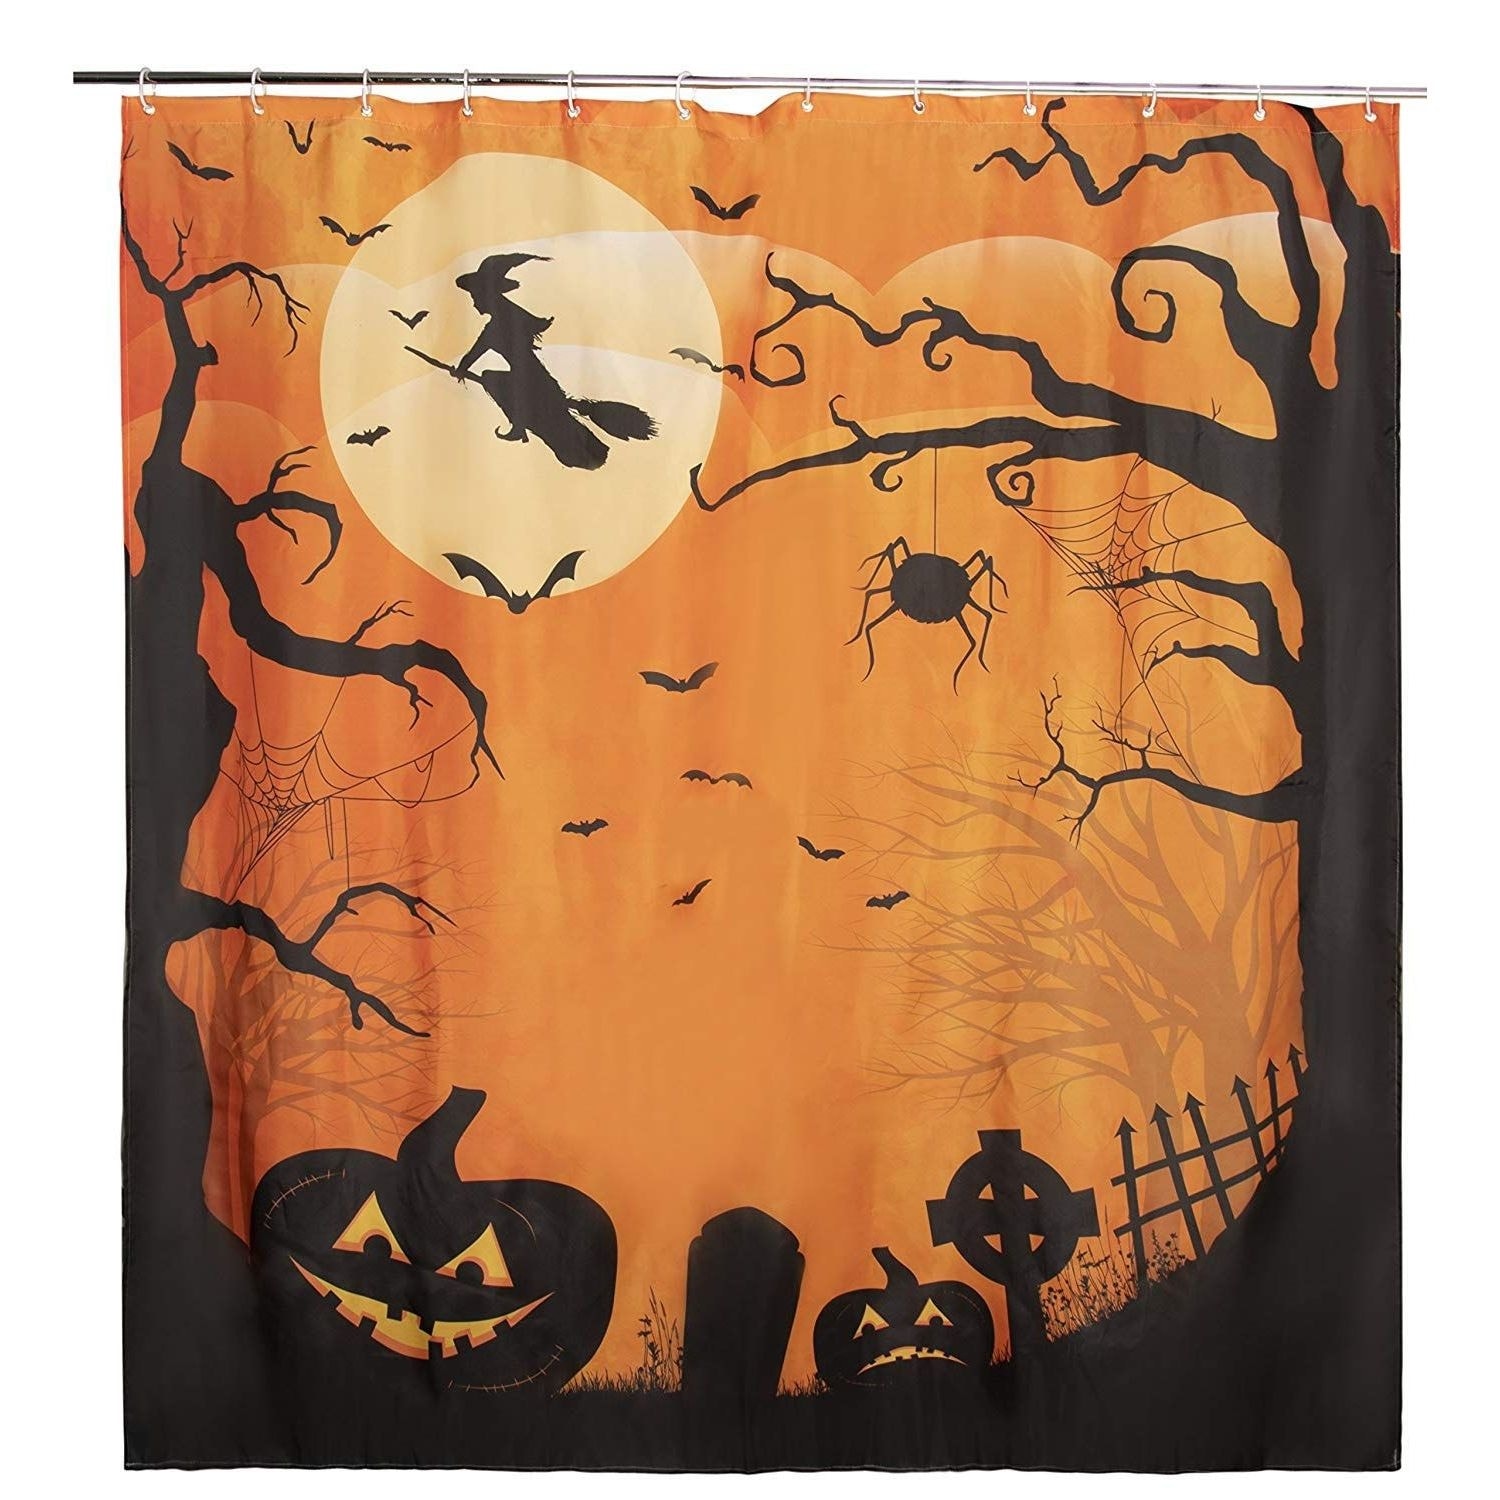 https://ak1.ostkcdn.com/images/products/is/images/direct/1b44a4d41413b22dc37a87e7d00719fb4e6486d0/Halloween-Shower-Curtain-12-Hook-Bathroom-Decor-72%22x72%22-with-Witch-Bat-Pumpkin.jpg